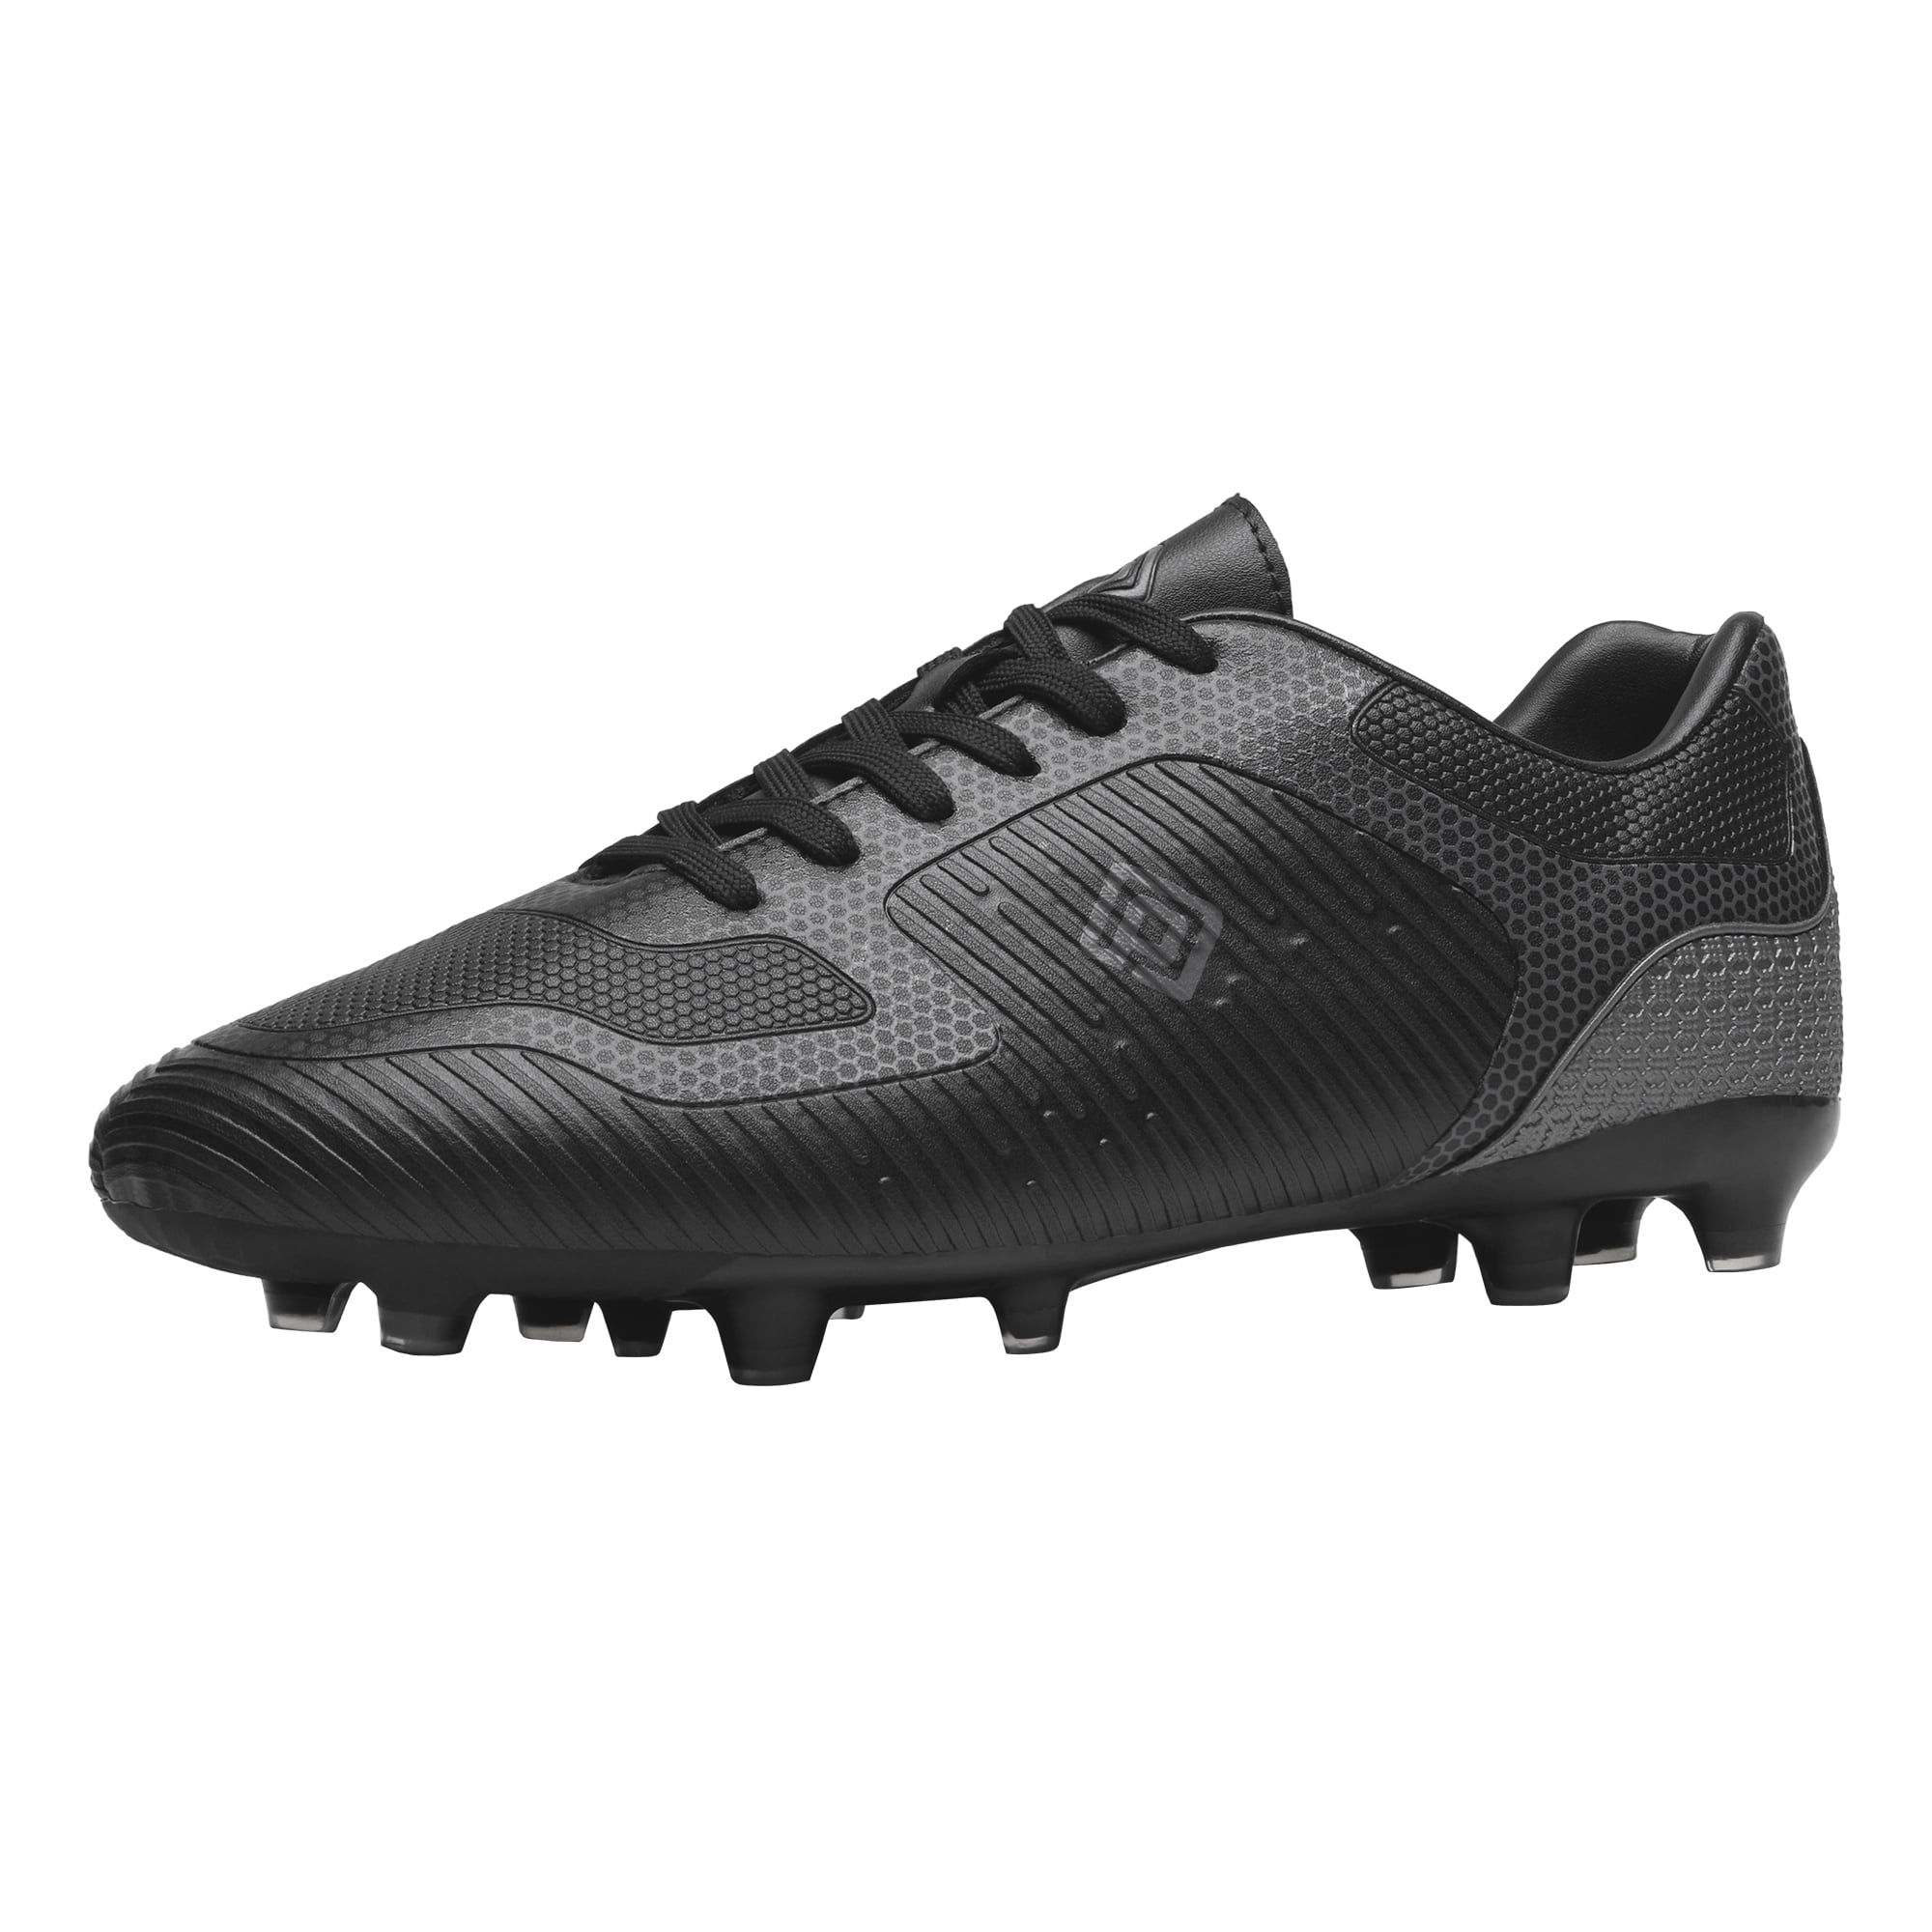 DREAM PAIRS Mens Cleats Football Soccer Shoes 